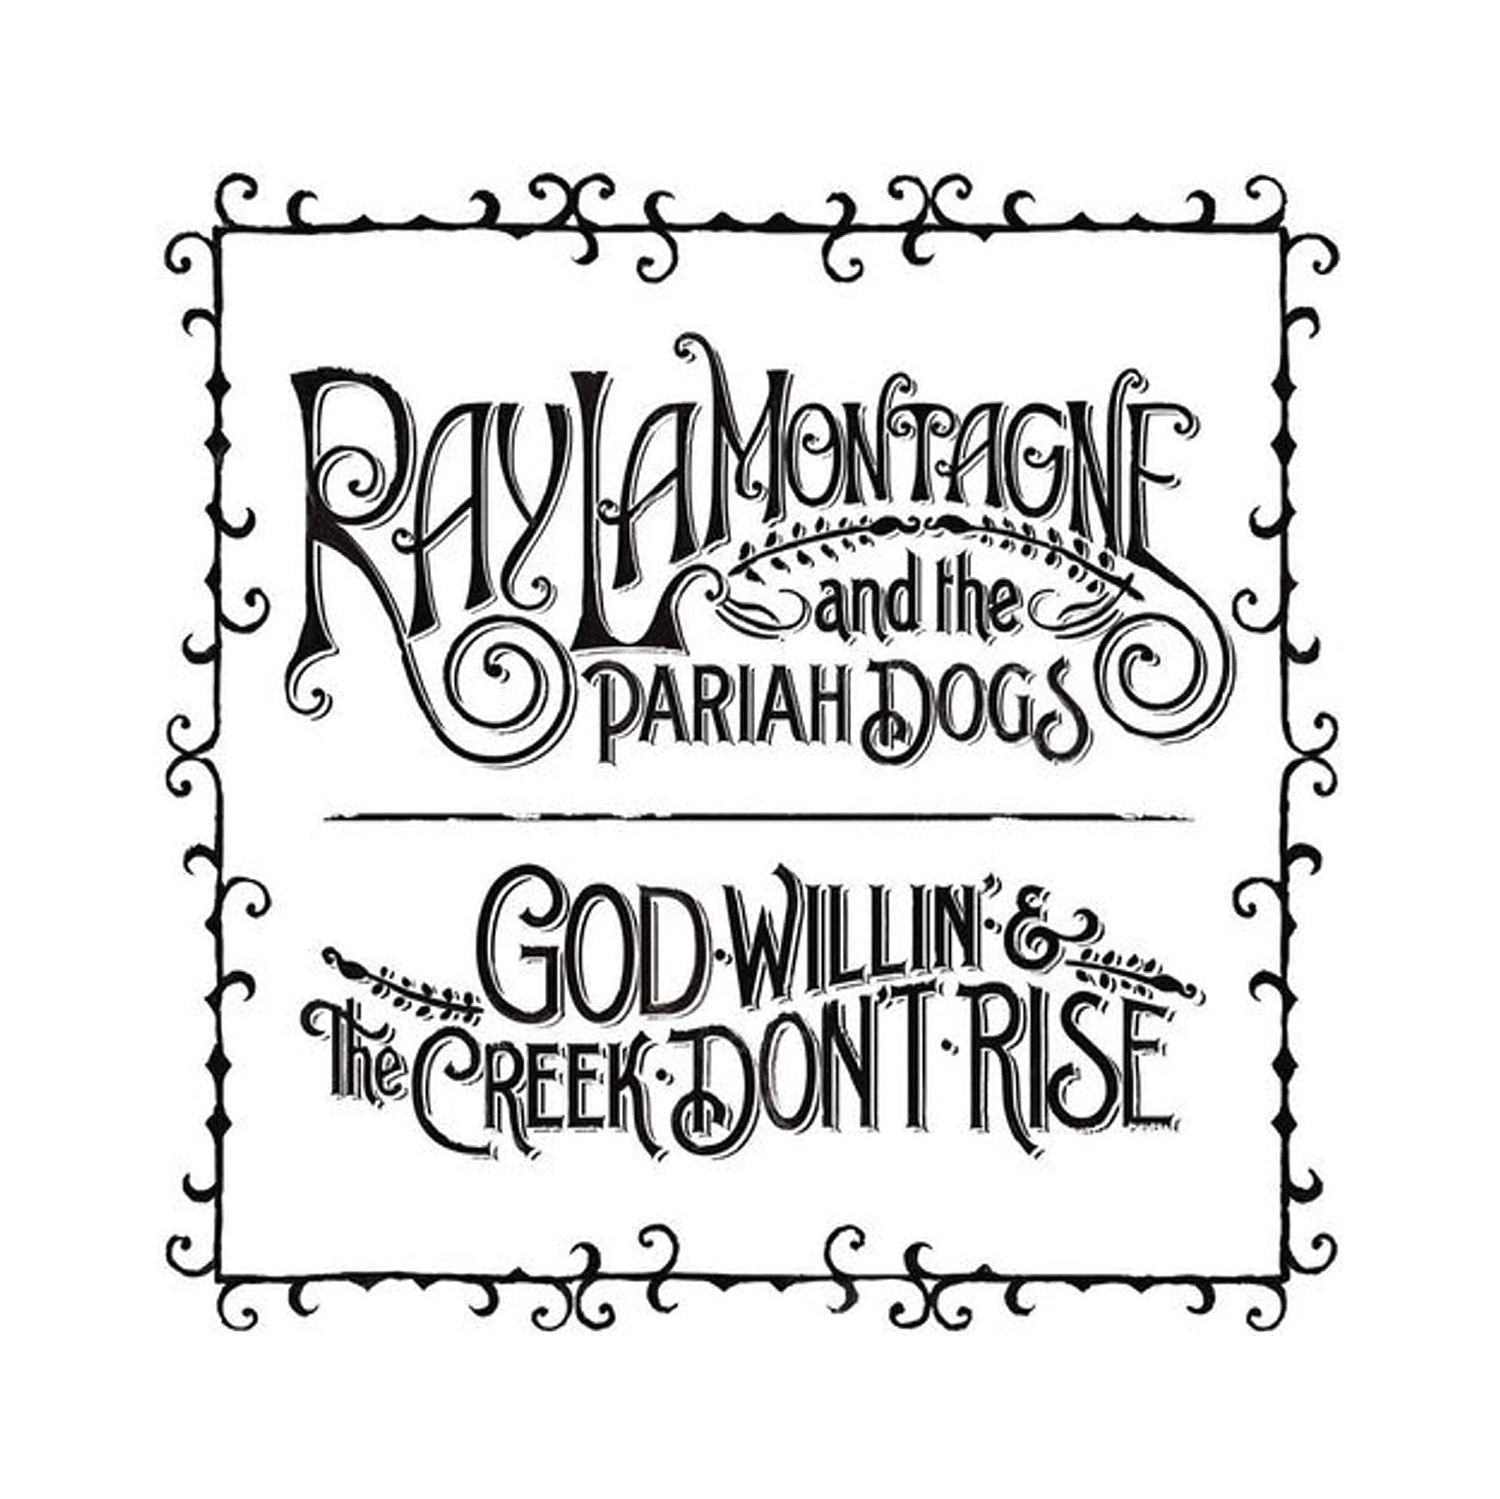 God Willin' and The Creek Don't Rise by Ray Lamontagne & the Pariah Dogs (Record, 2010)